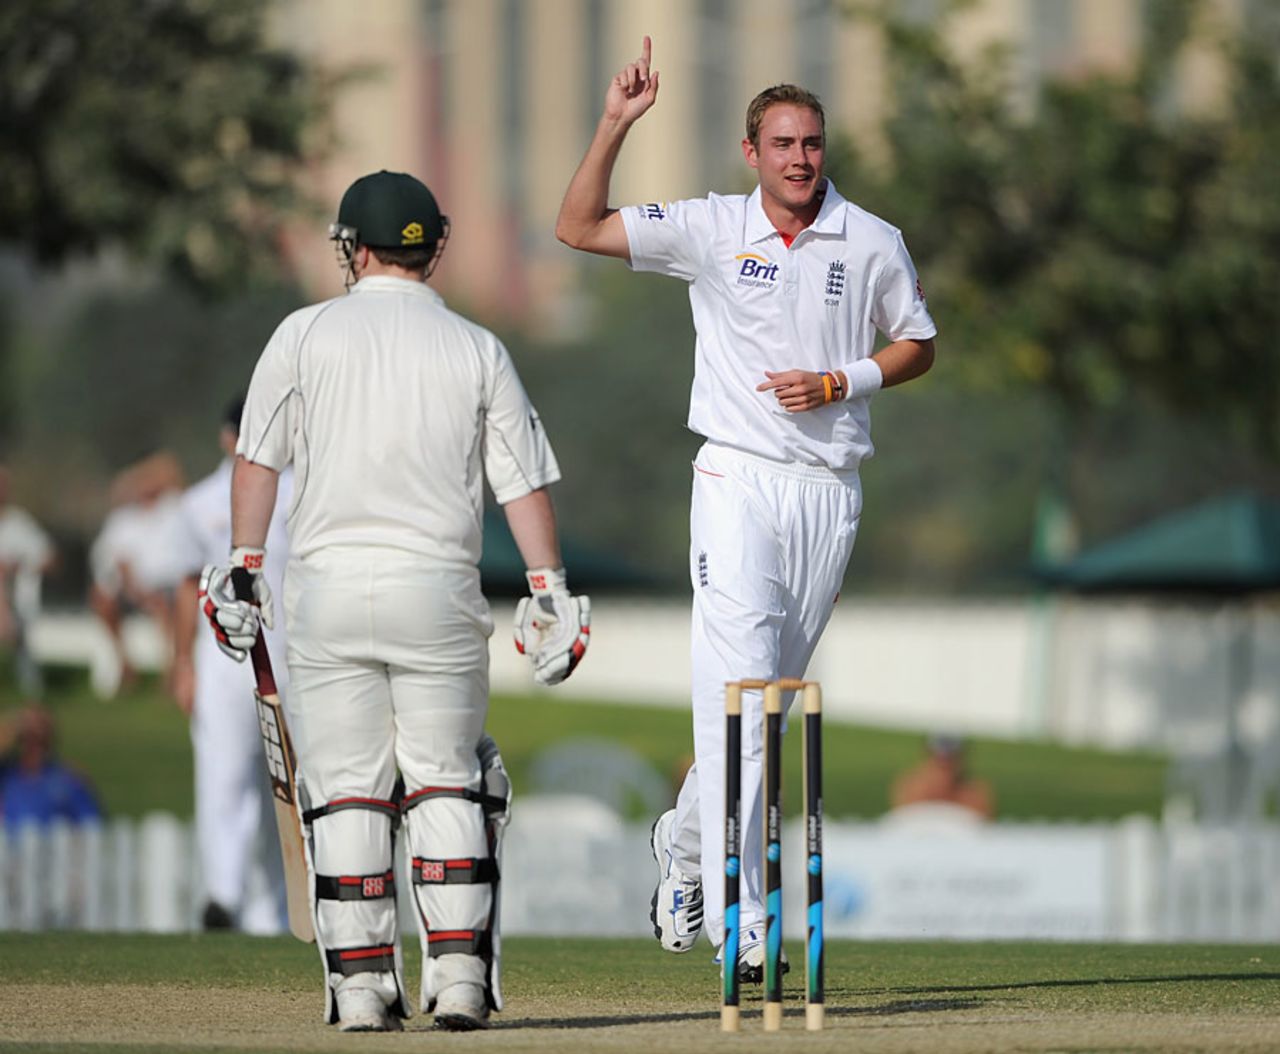 Stuart Broad again made inroads with the new ball, ICC Combined XI v England XI, Dubai, 2nd day, January 8, 2012